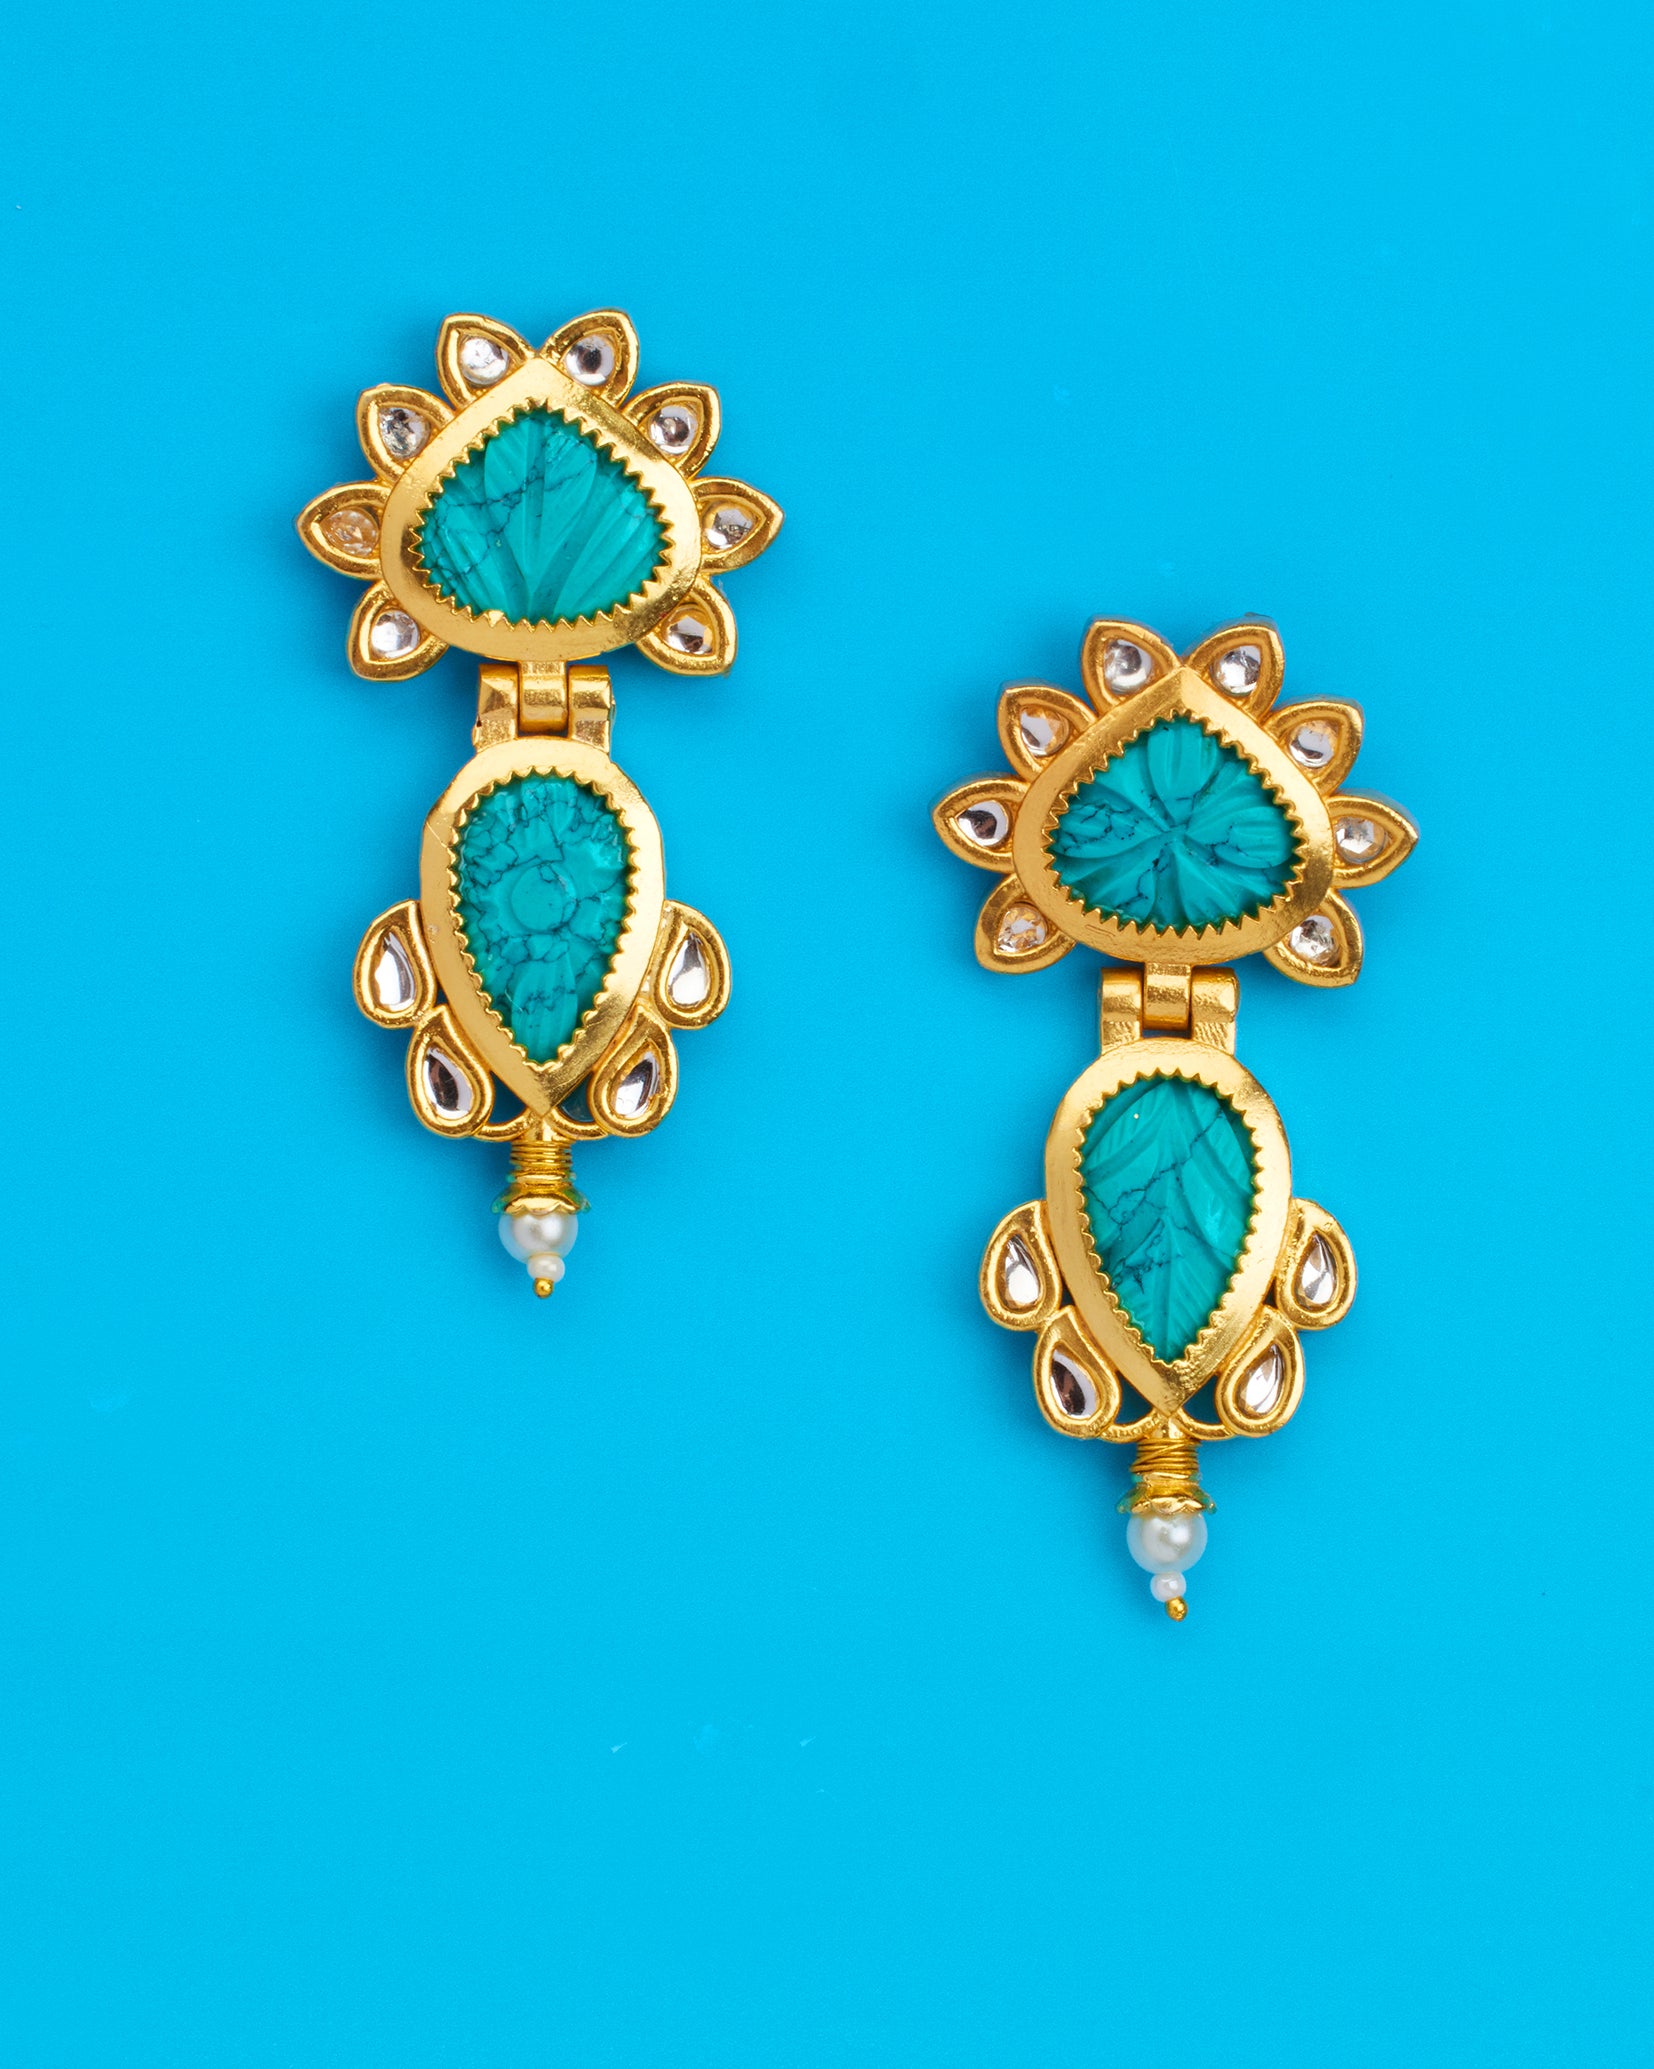 Parker Earrings in Turquoise Colored Stone